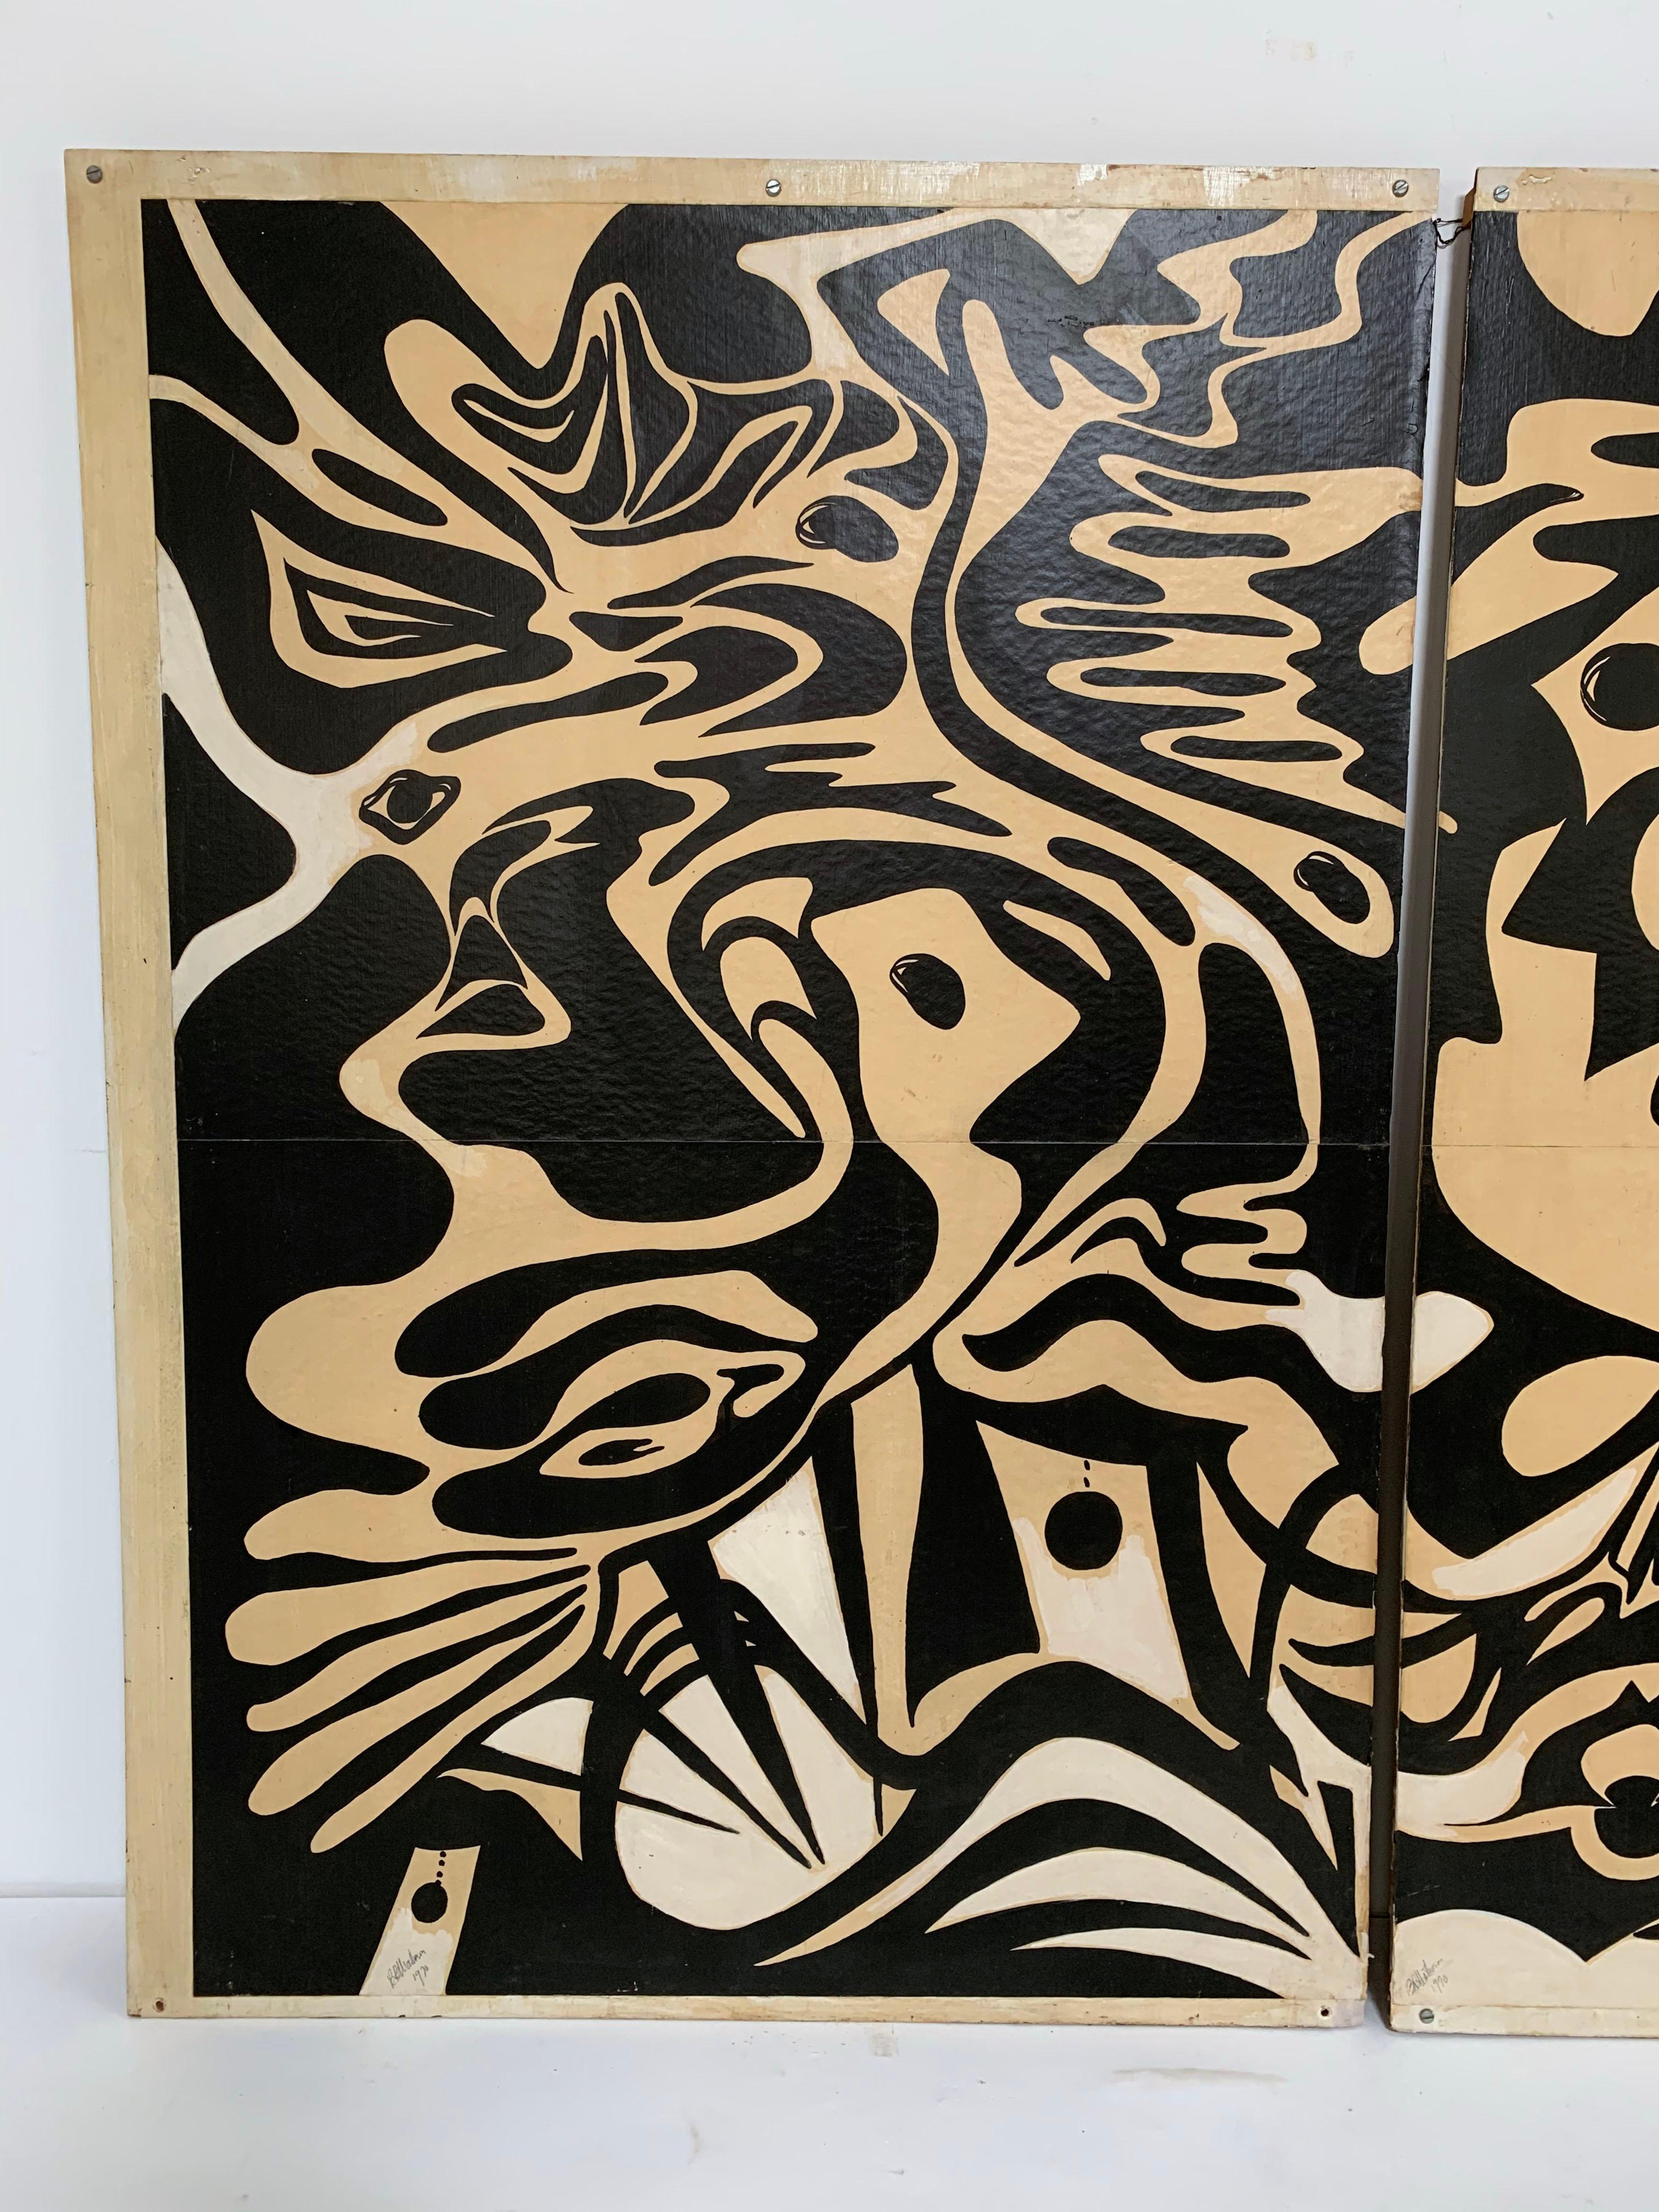 An original, circa 1970, large scale figurative abstract triptych painting in contrasting monochromatic tones of ivory, ochre and black. Dynamic, almost “Guernica” like imagery of interconnected graphic panels sketched in oil and ink on Bristol